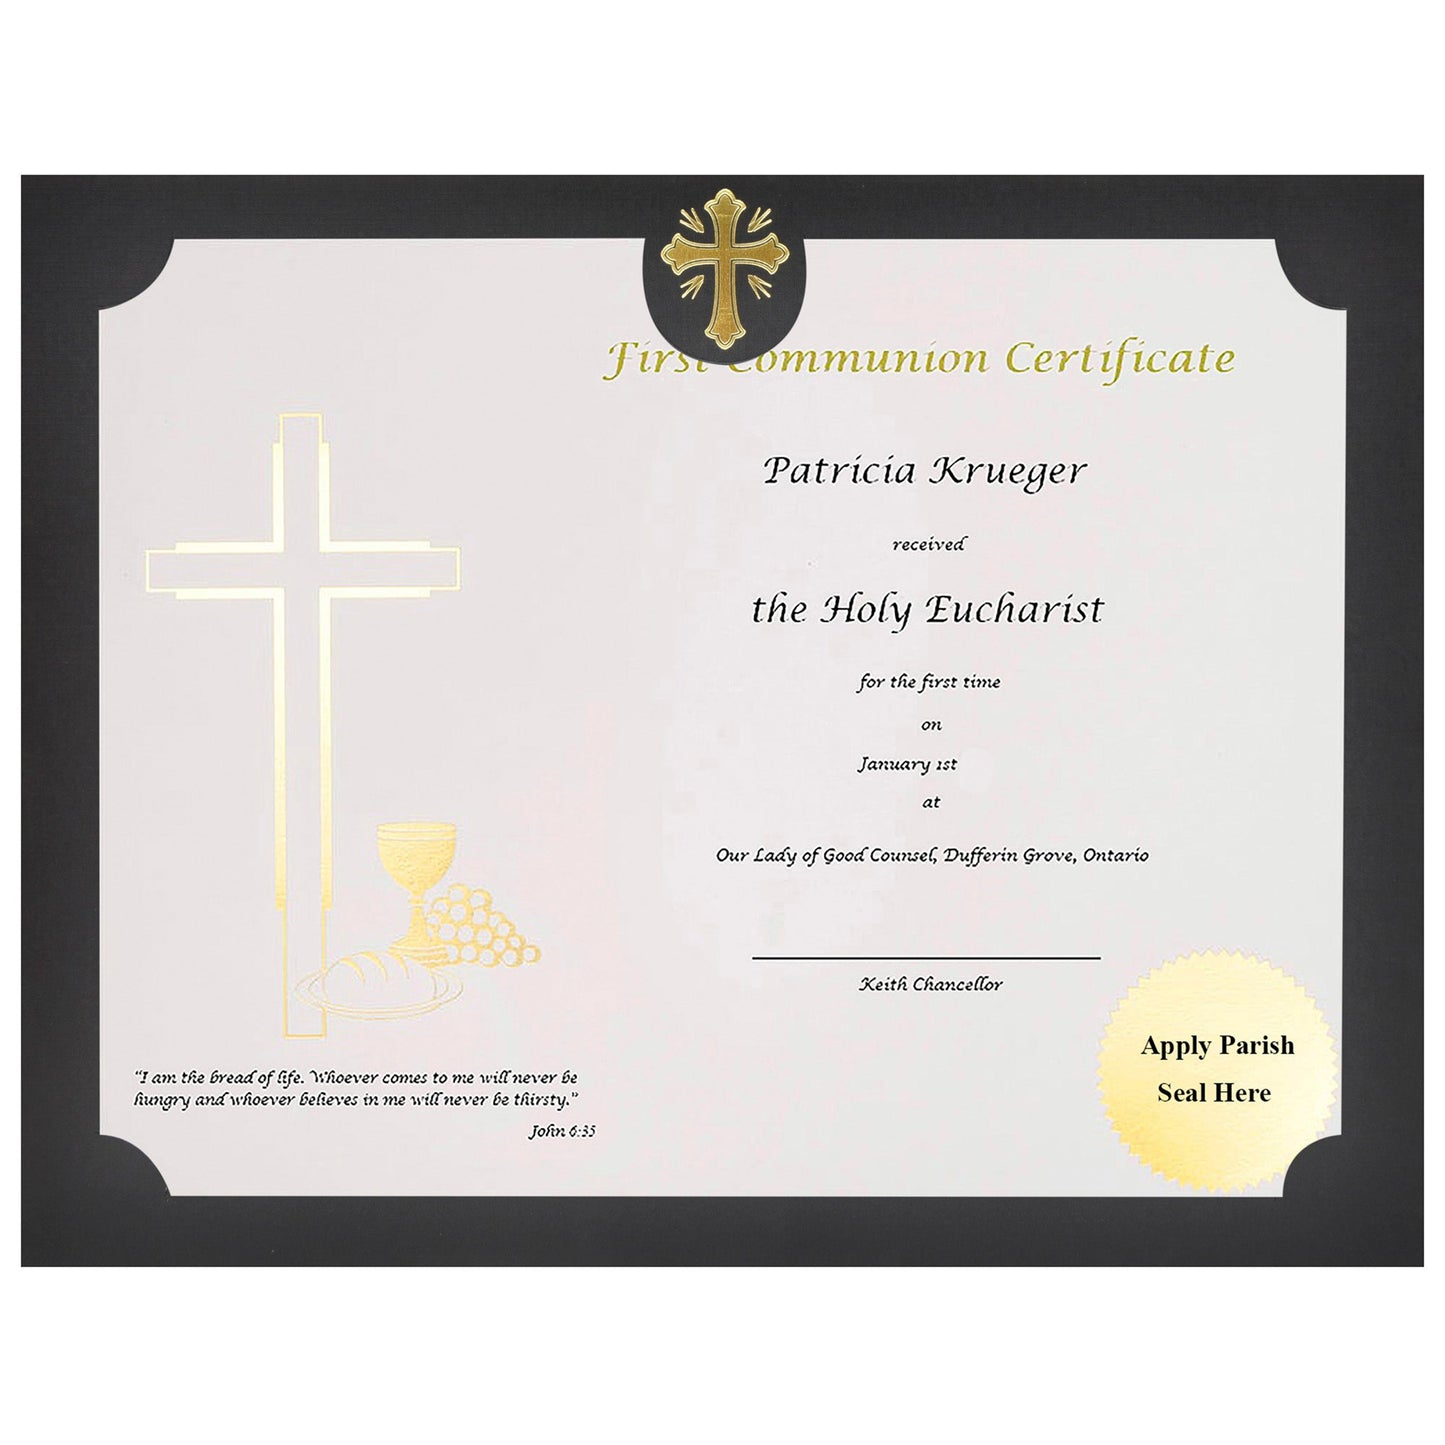 St. James® Religious Certificates - First Communion Certificates, Gold Foil, White Card Stock, Pack of 50